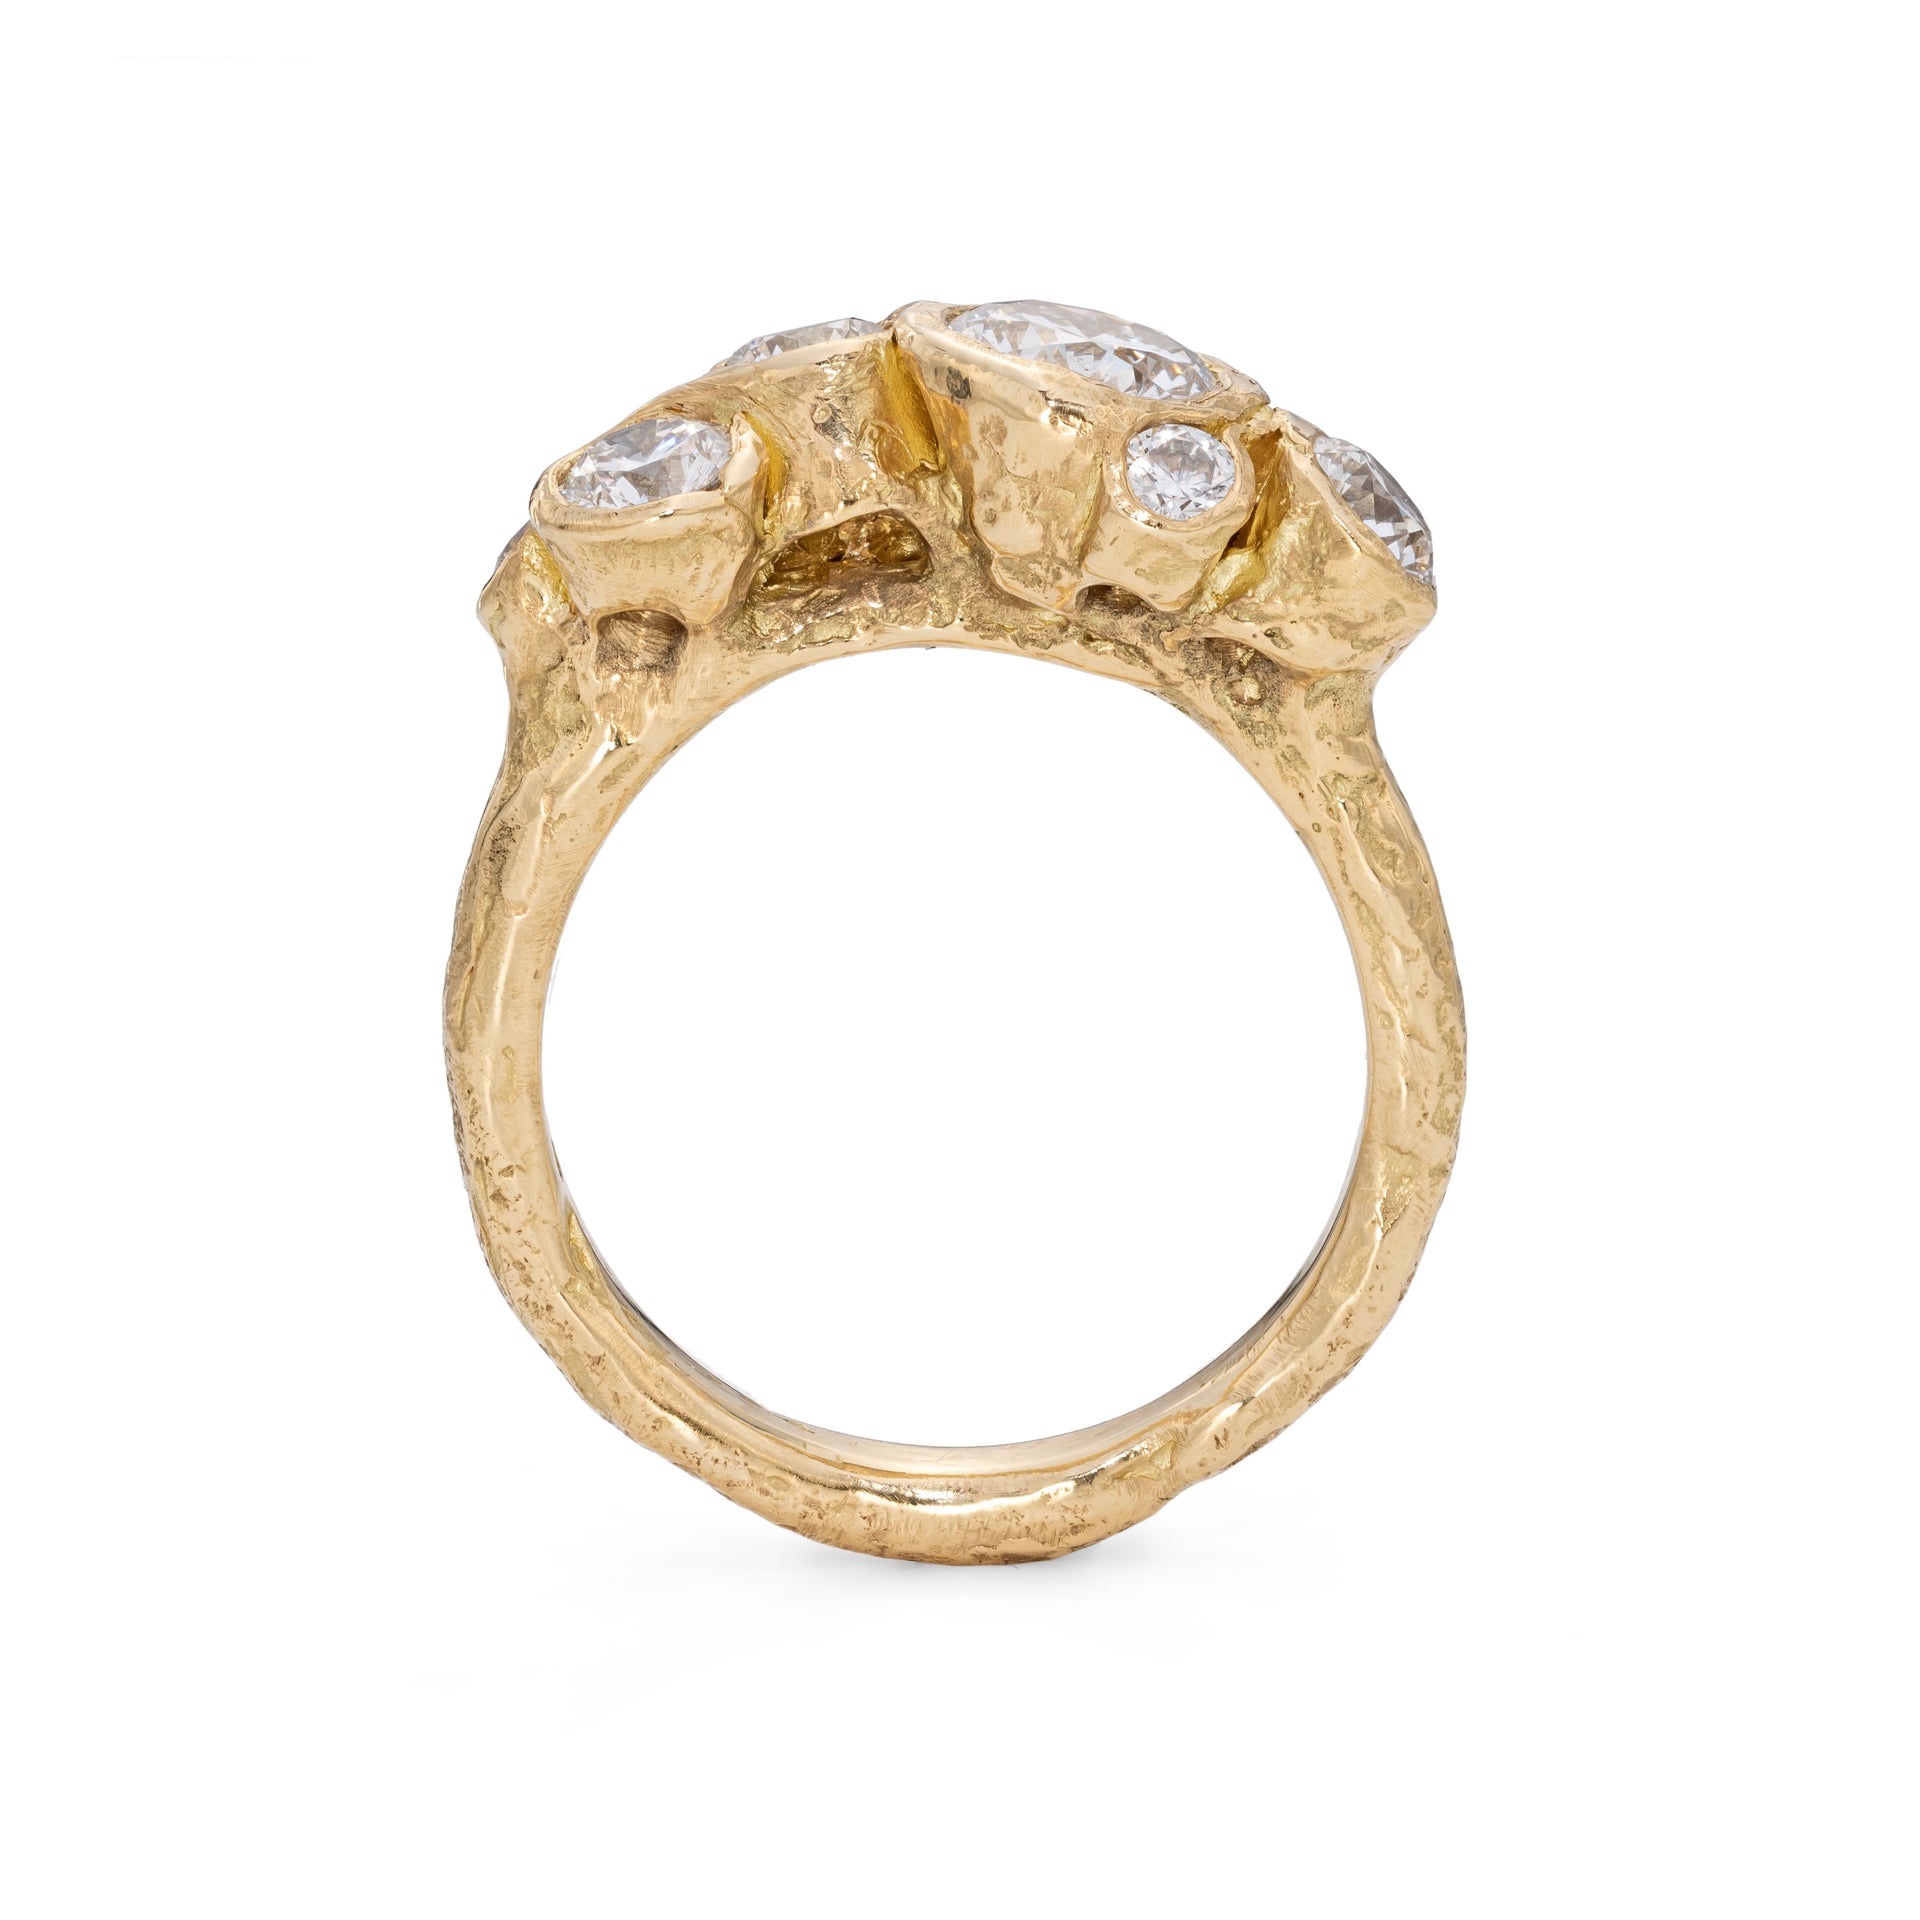 Side profile of an organic textured 18ct gold and diamond ring, handmade by Emily Nixon.